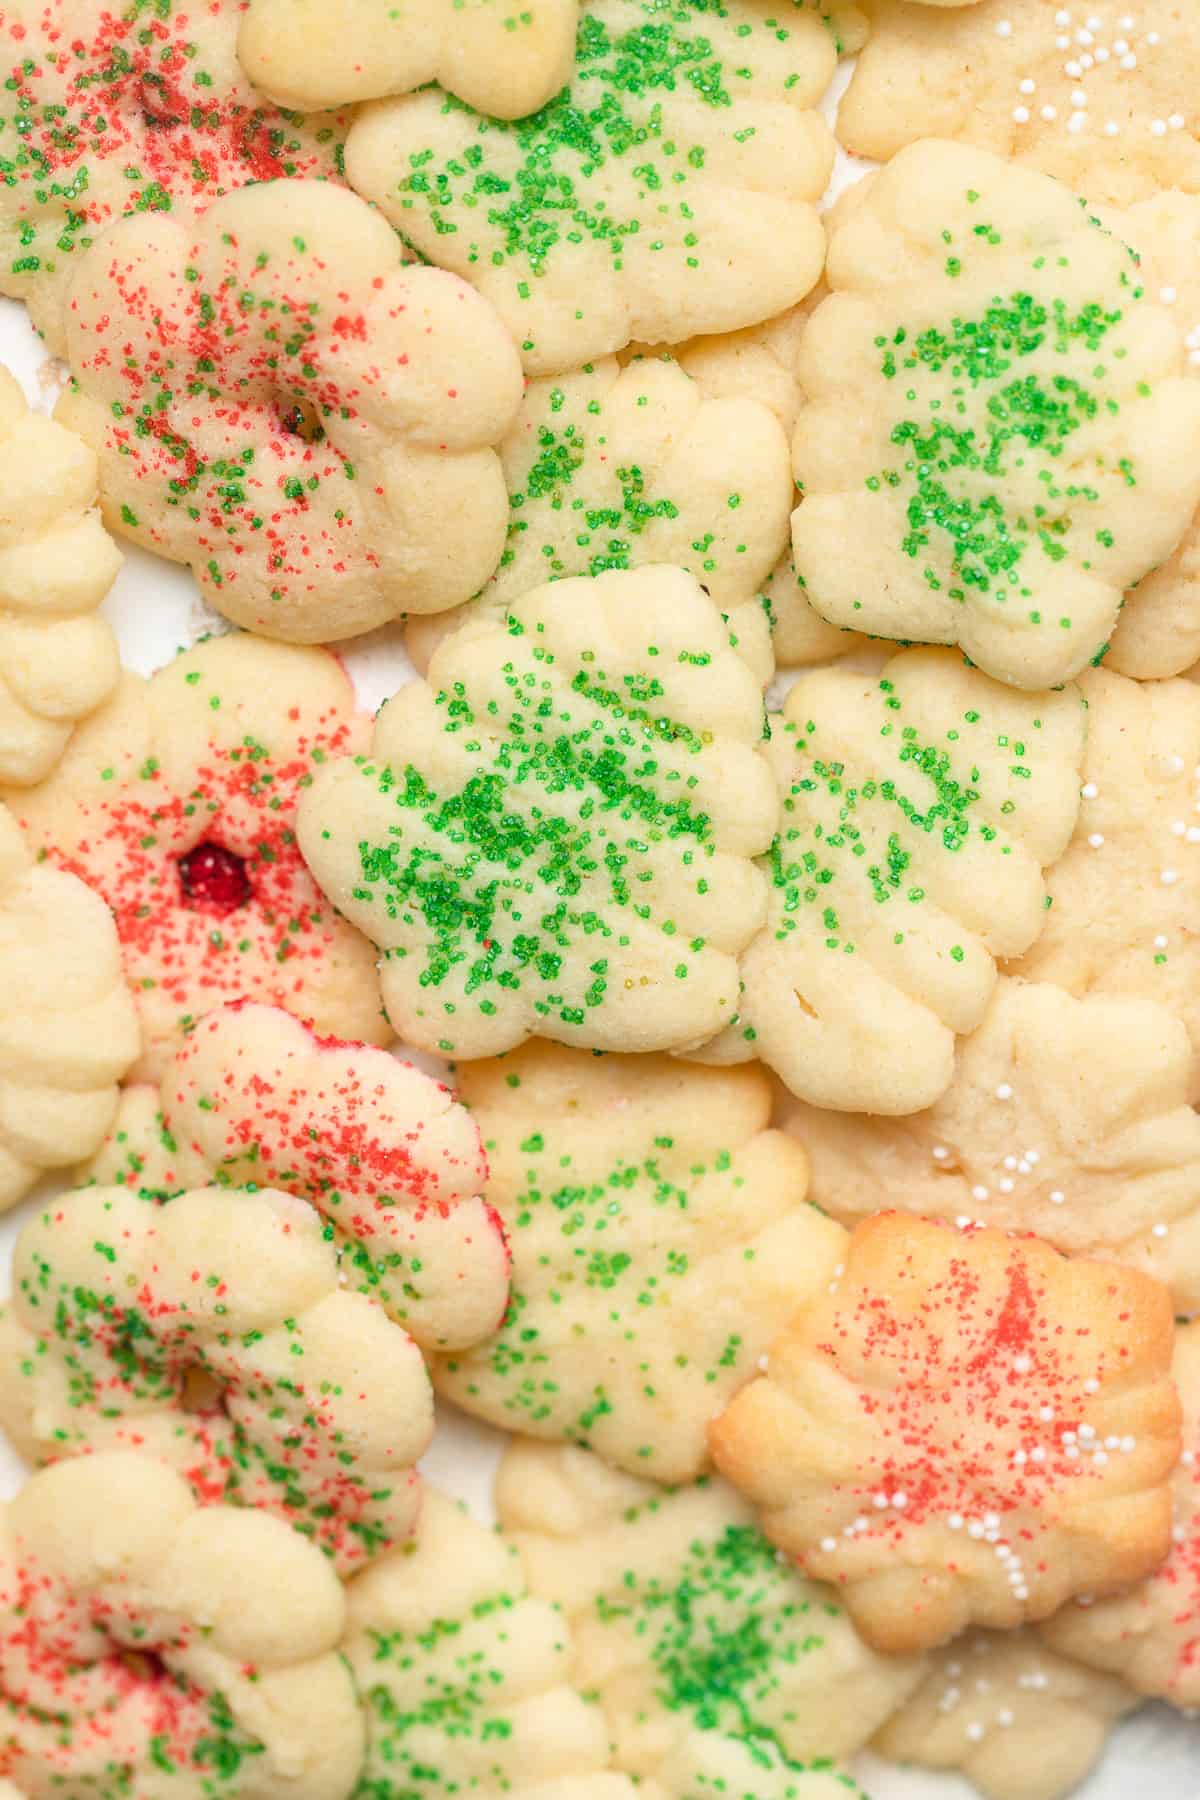 Almond spritz cookies shaped as Christmas trees, wreaths, and snowflakes.